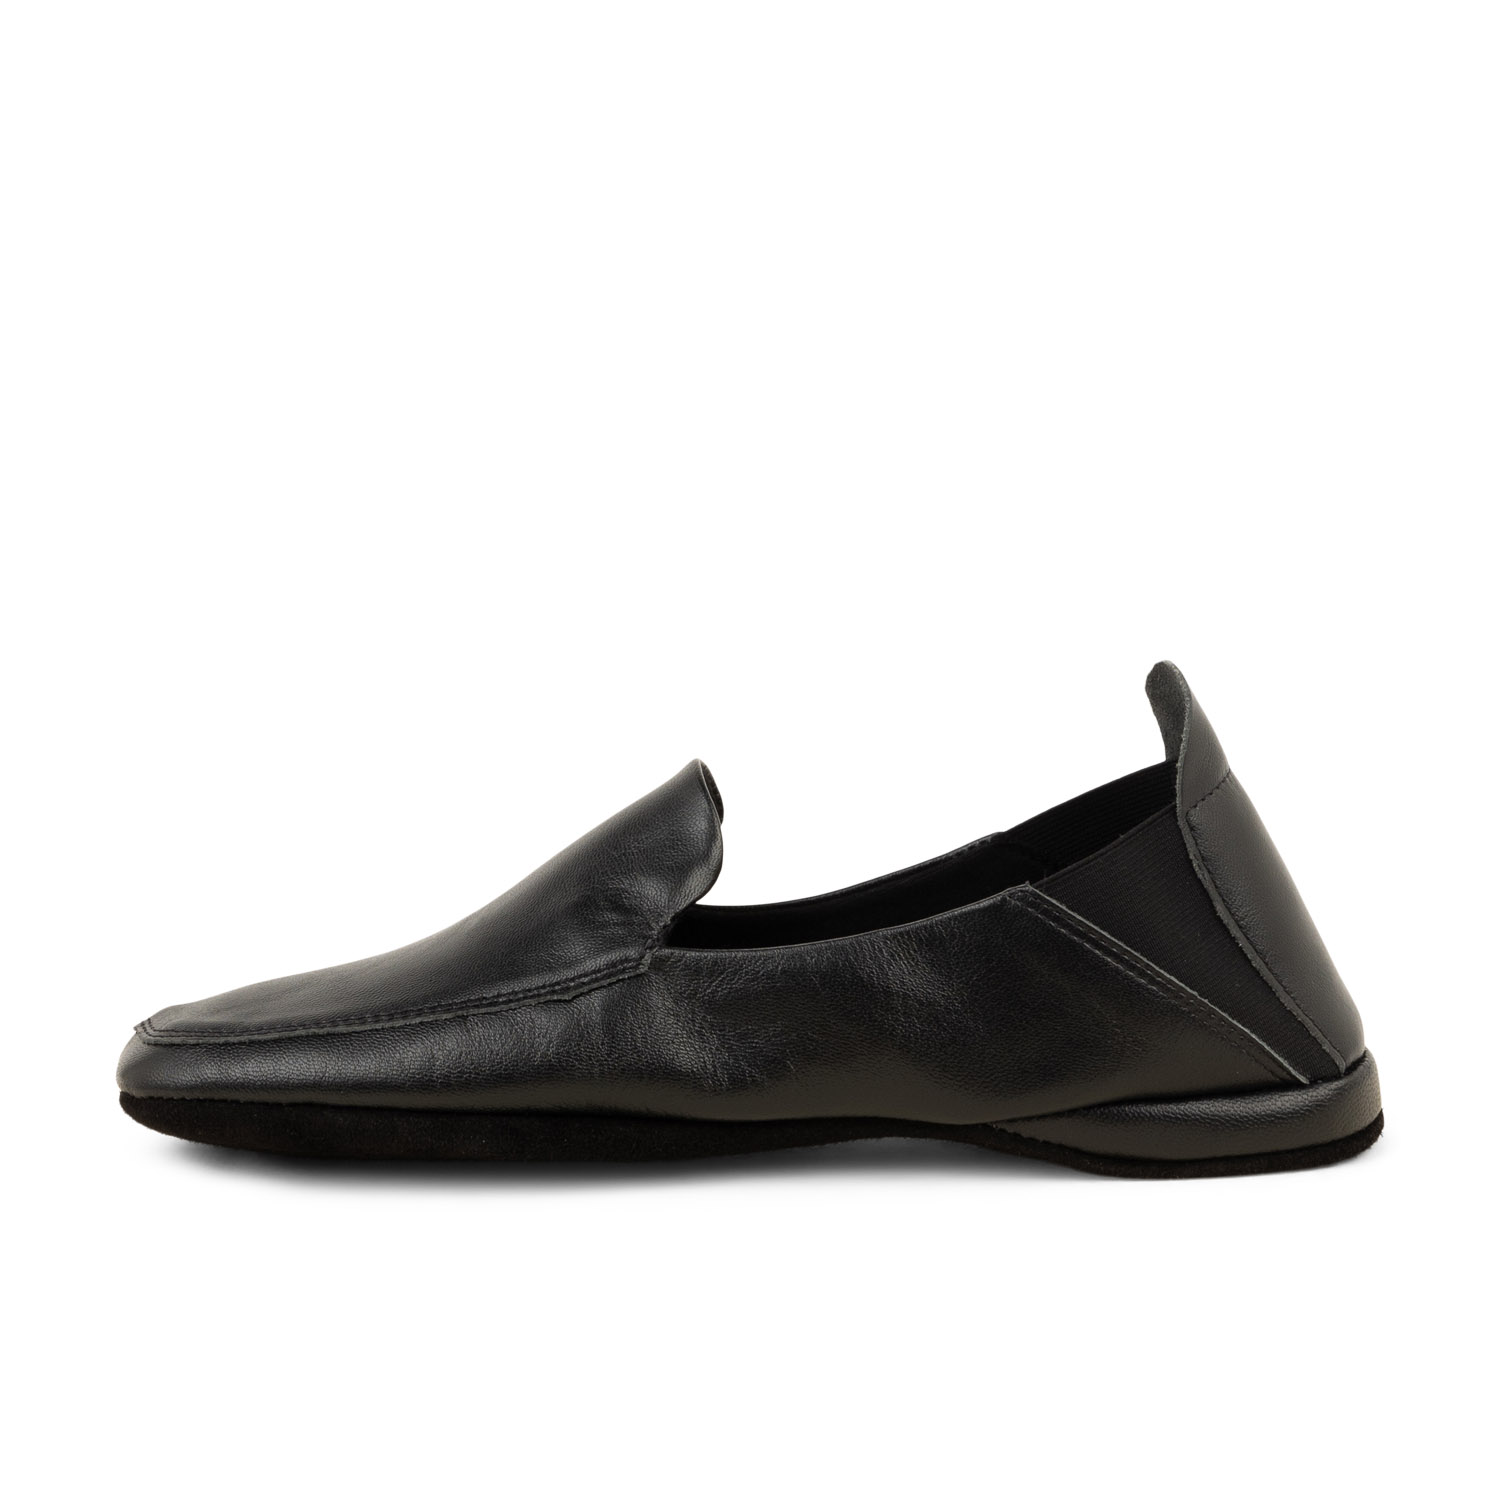 04 - DUO - EREL - Chaussons - Cuir